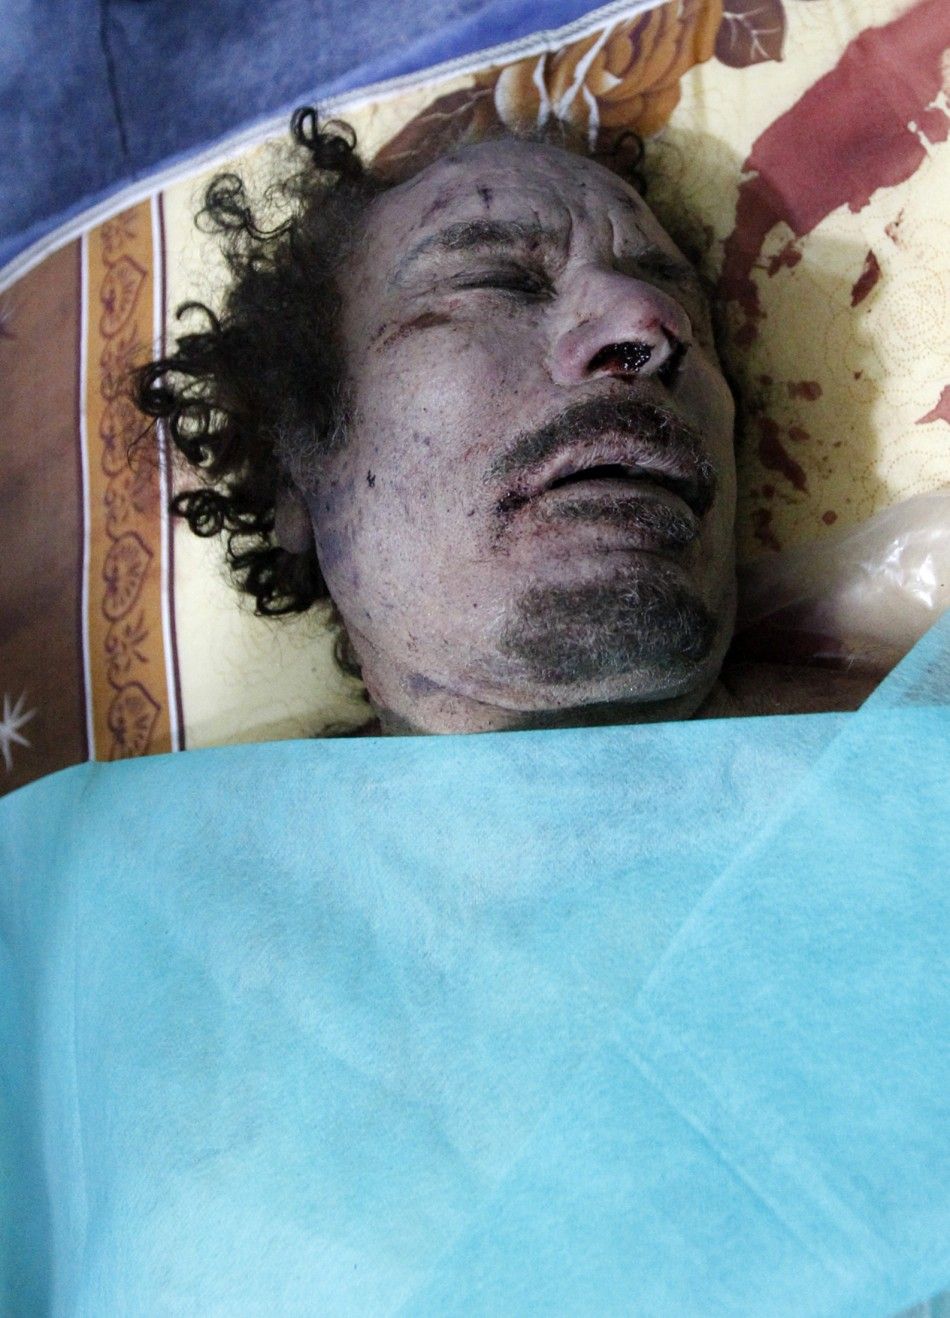 The body of Muammar Gaddafi is seen at a house in Misrata October 20, 2011